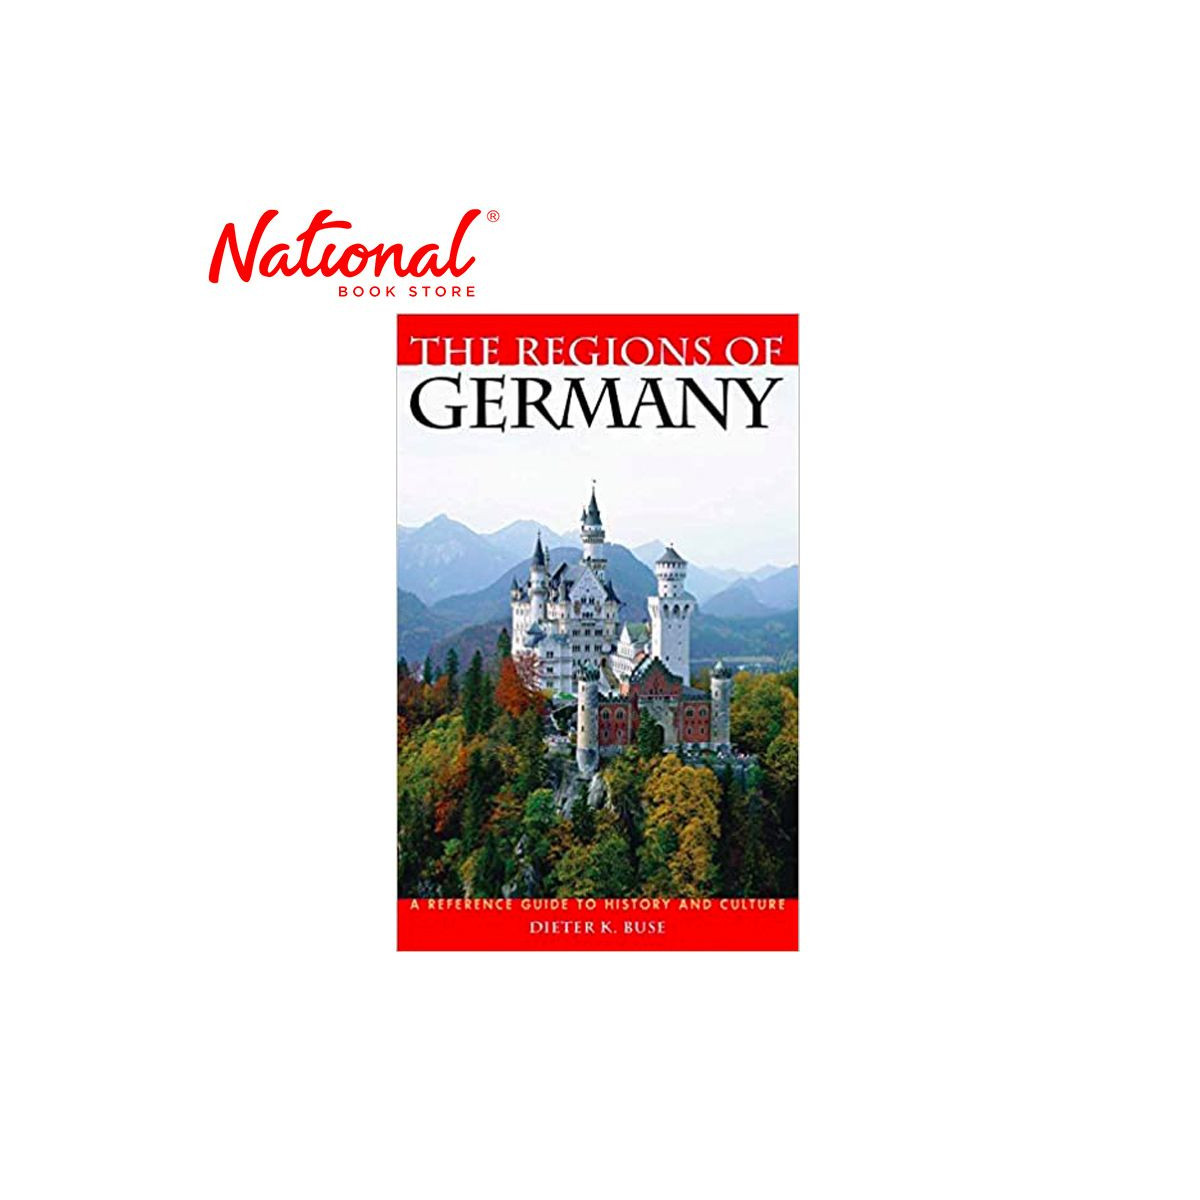 Regions Of Germany, The: A Reference Guide To History And Culture Trade Paperback by Dieter K. Buse